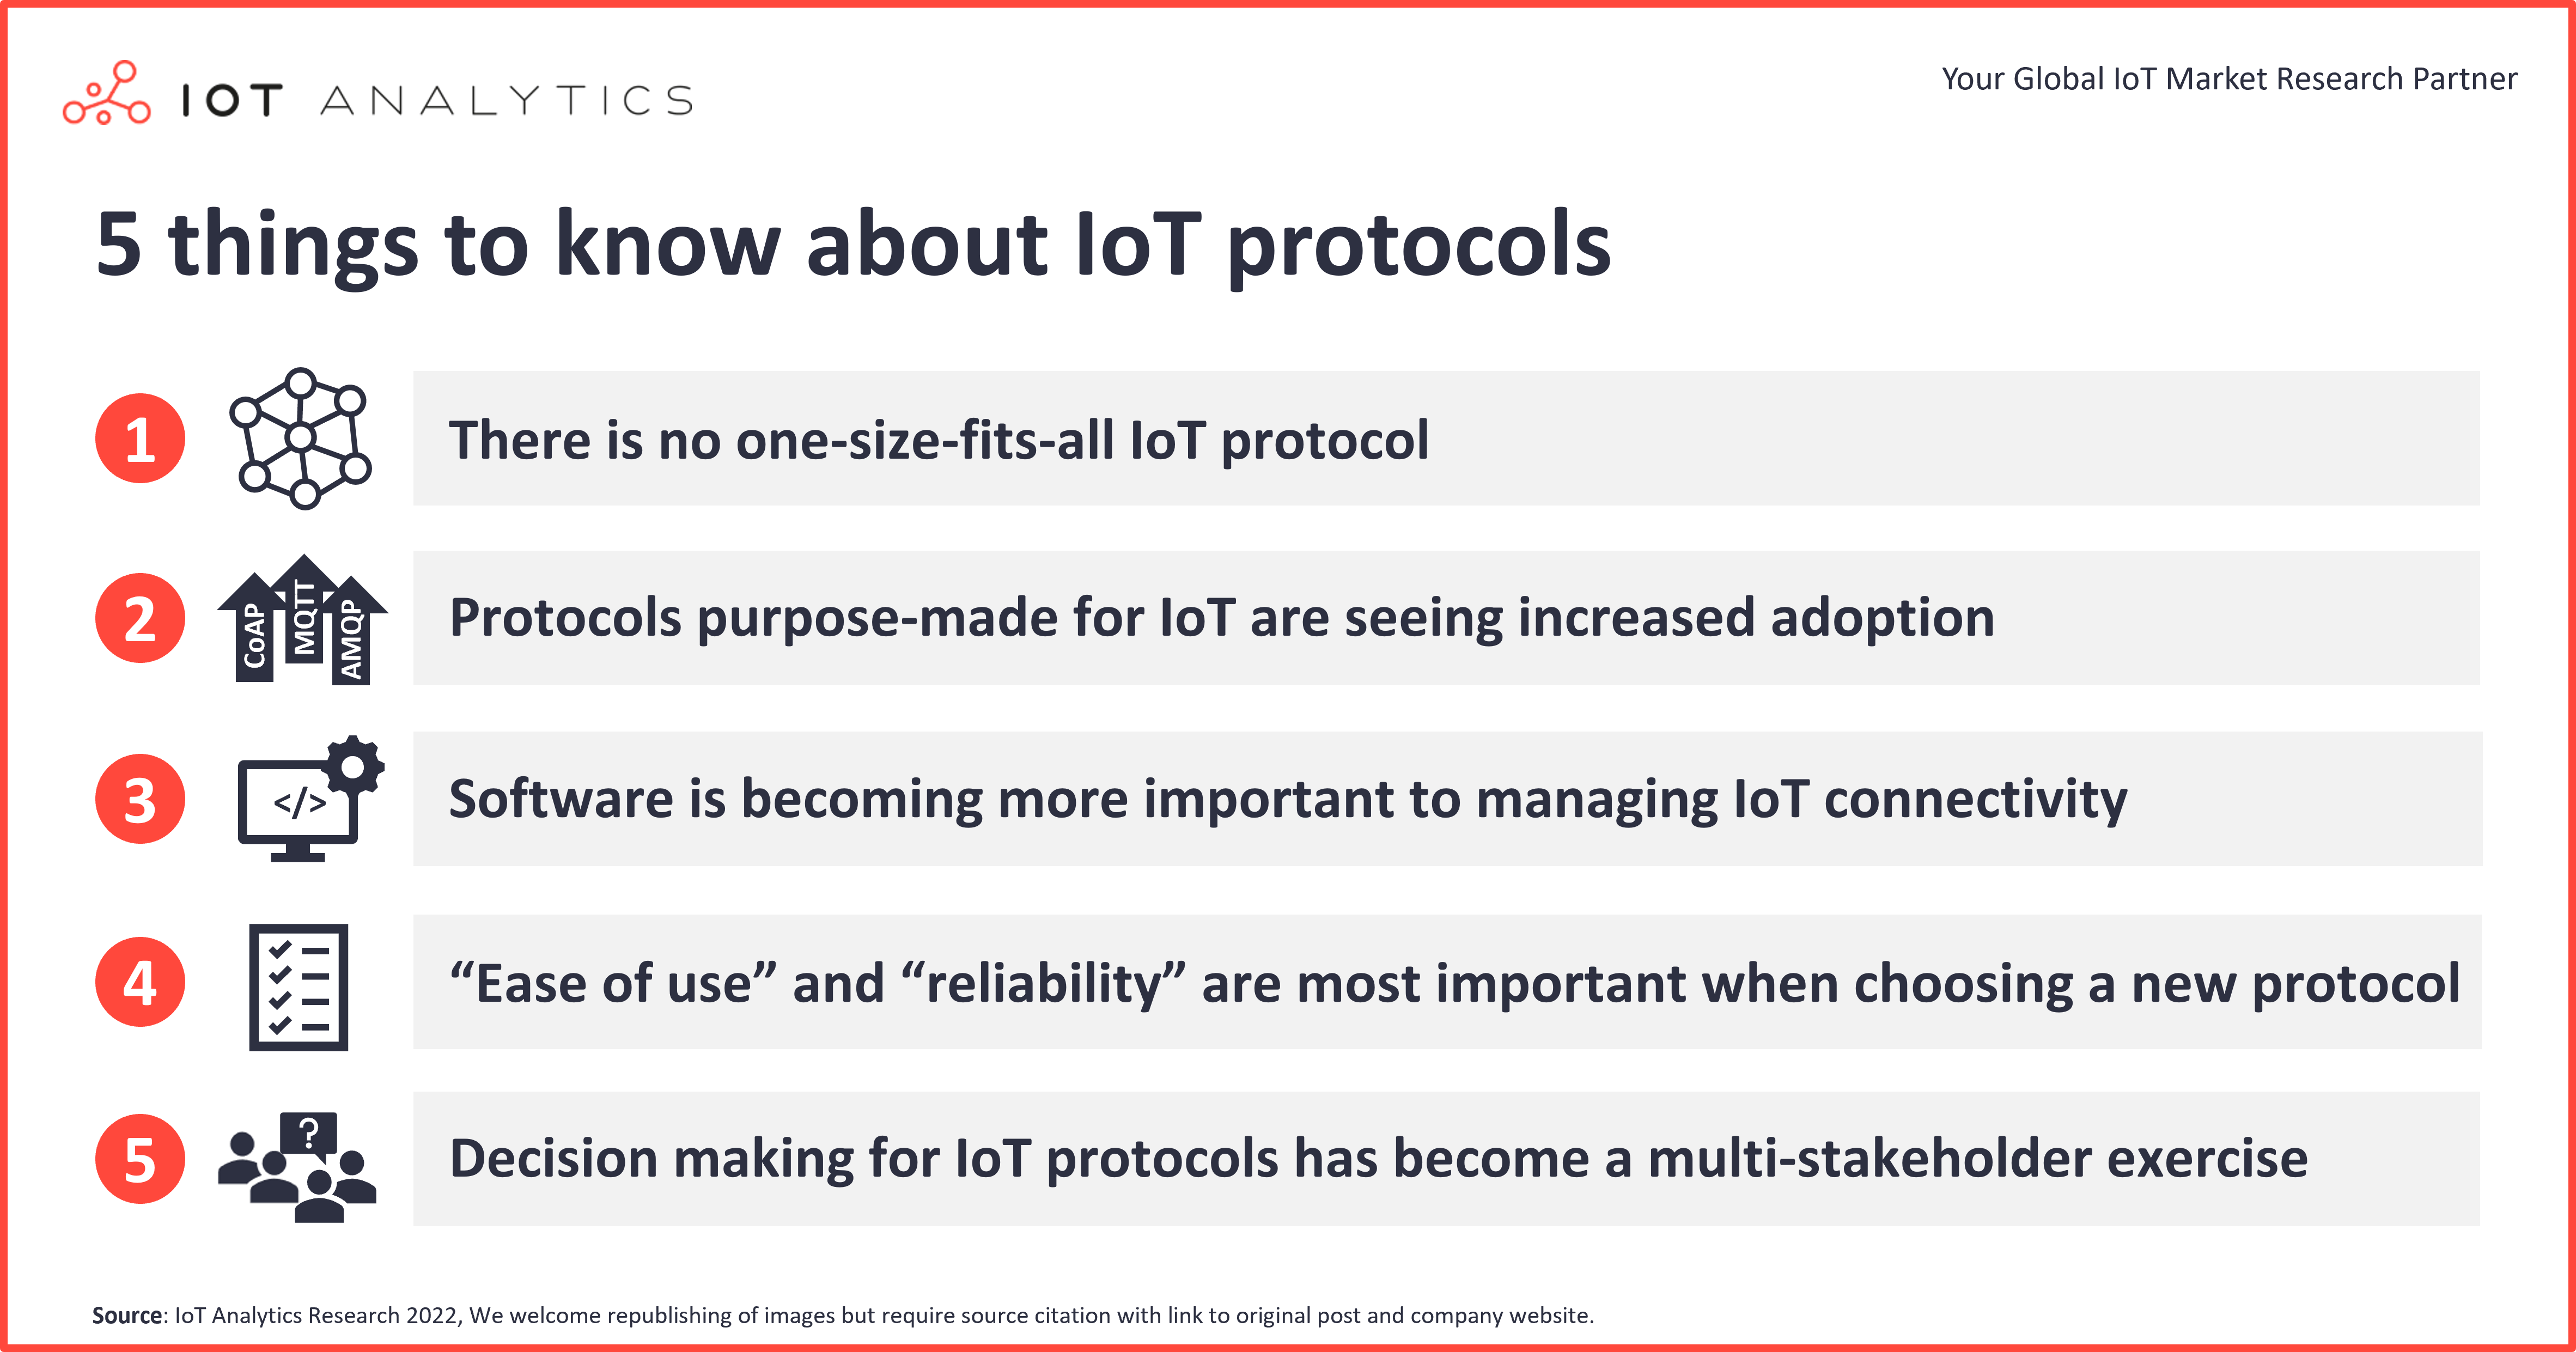 5 things to know about IoT protocols